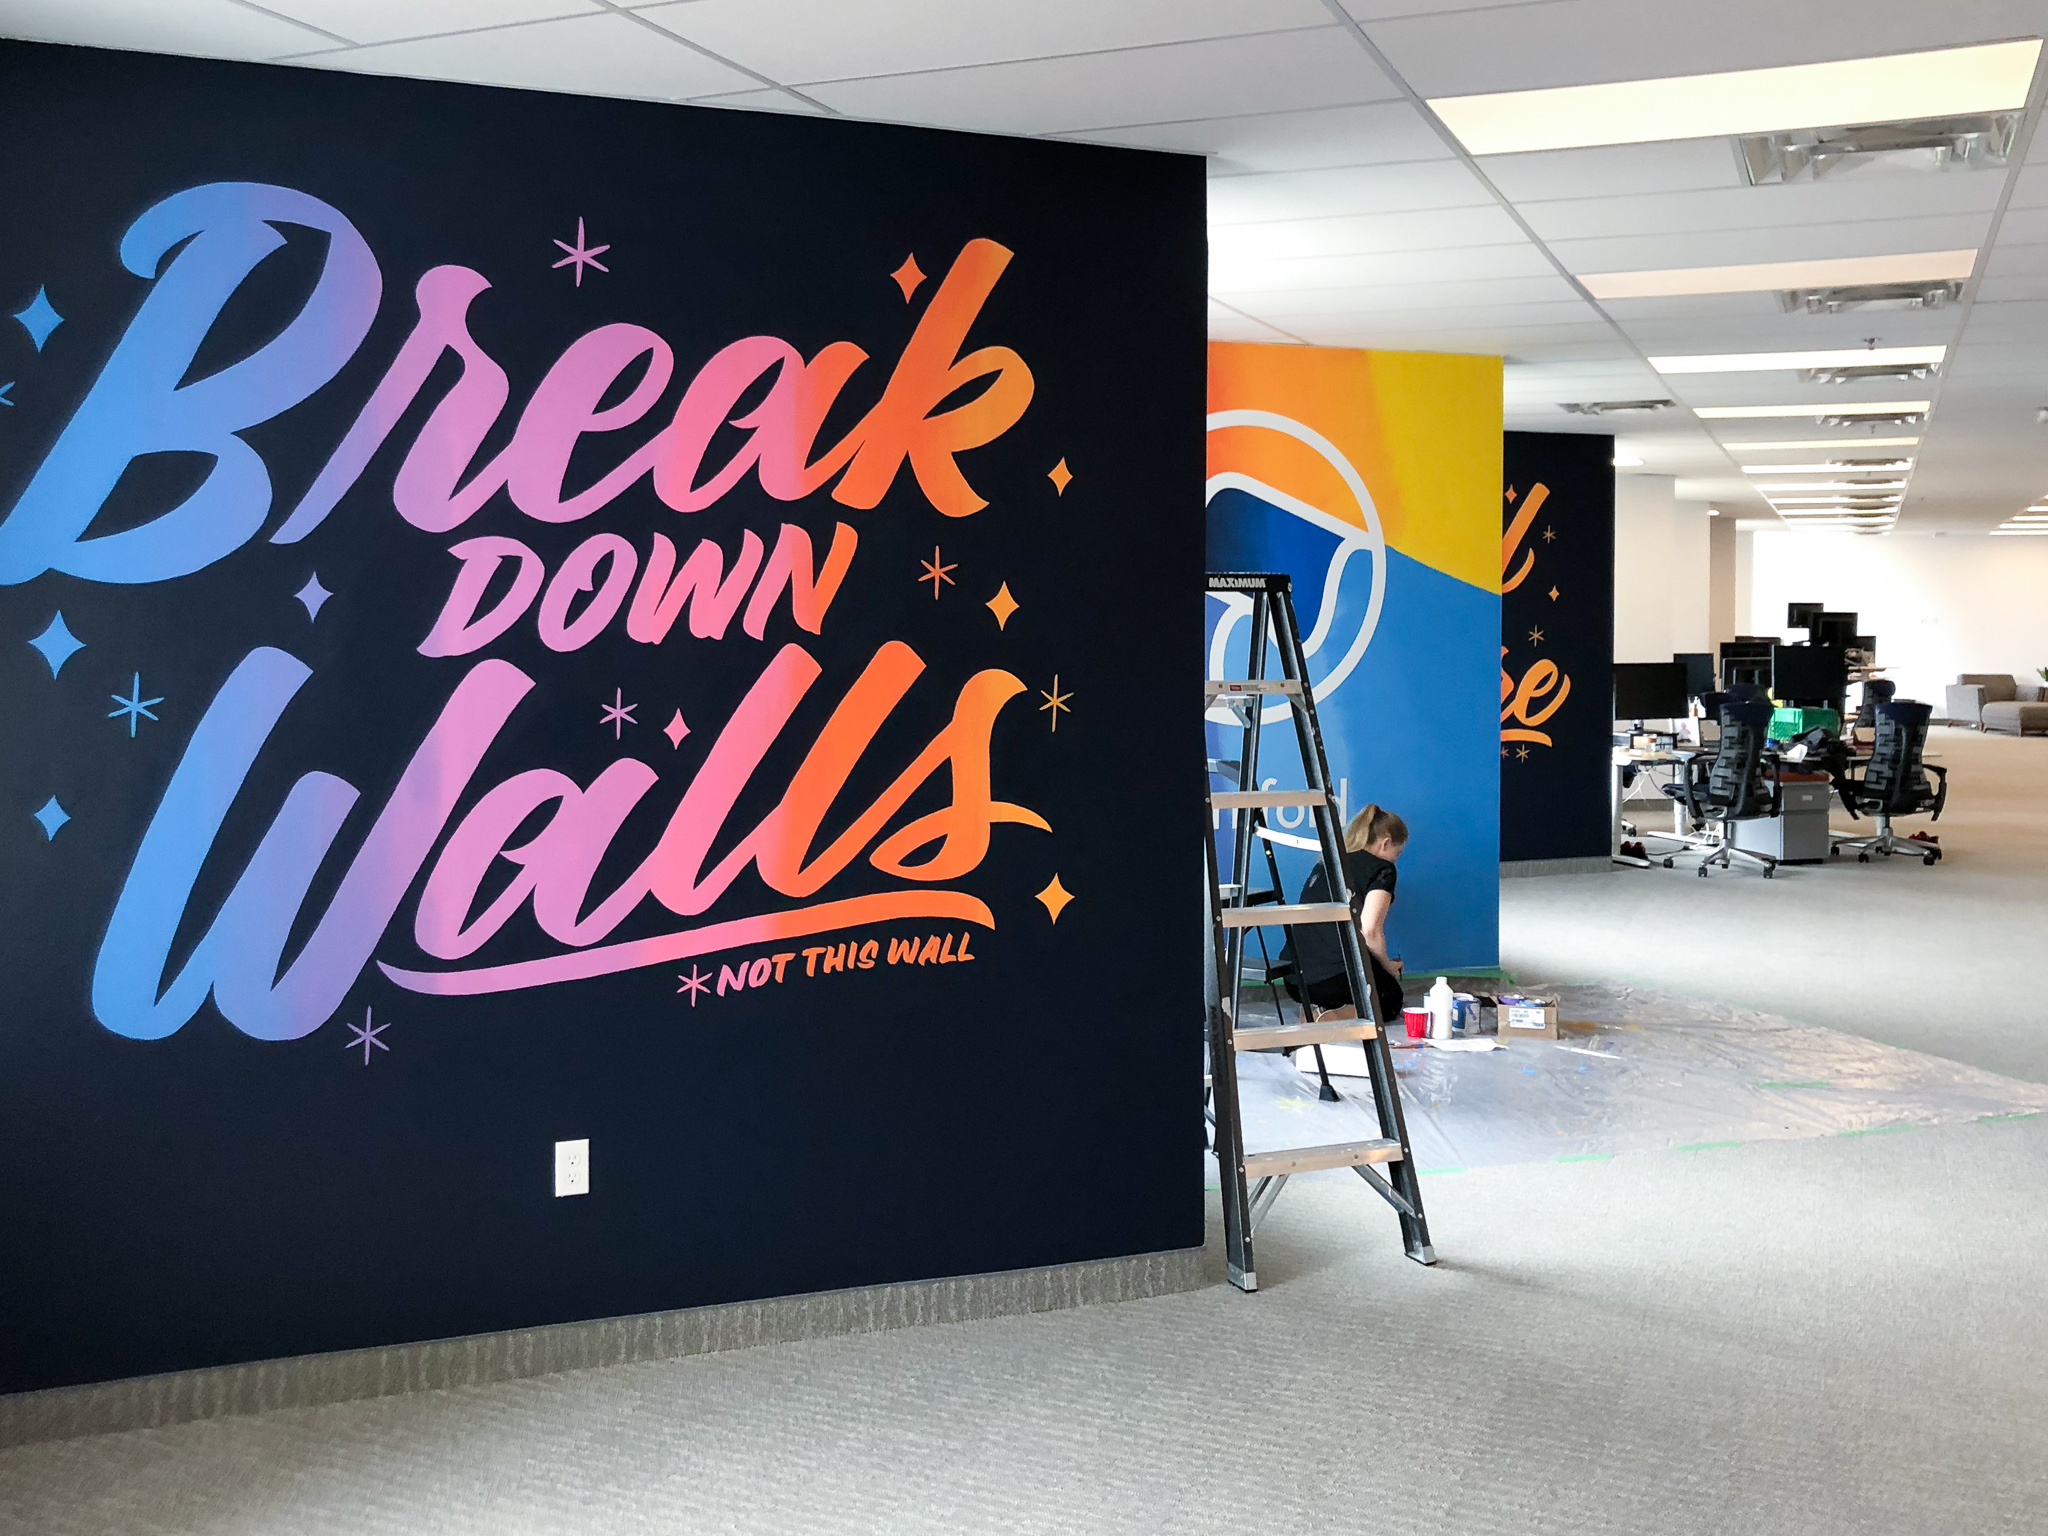 Manifold mural hand lettered by Hillery Powers